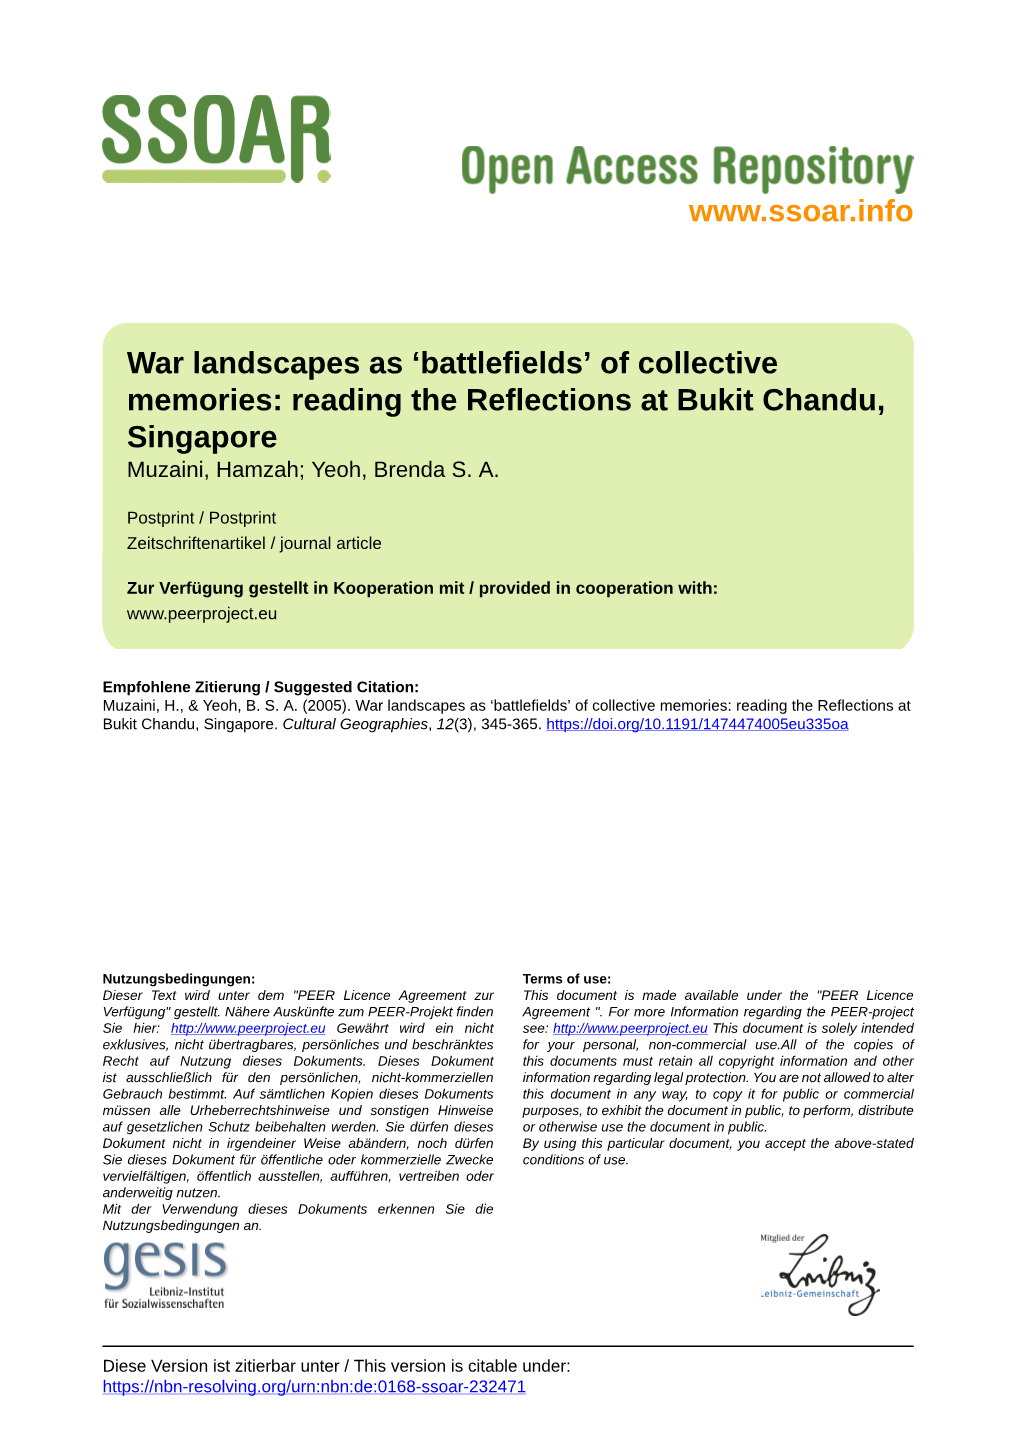 War Landscapes As 'Battlefields' of Collective Memories: Reading the Reflections at Bukit Chandu, Singapore